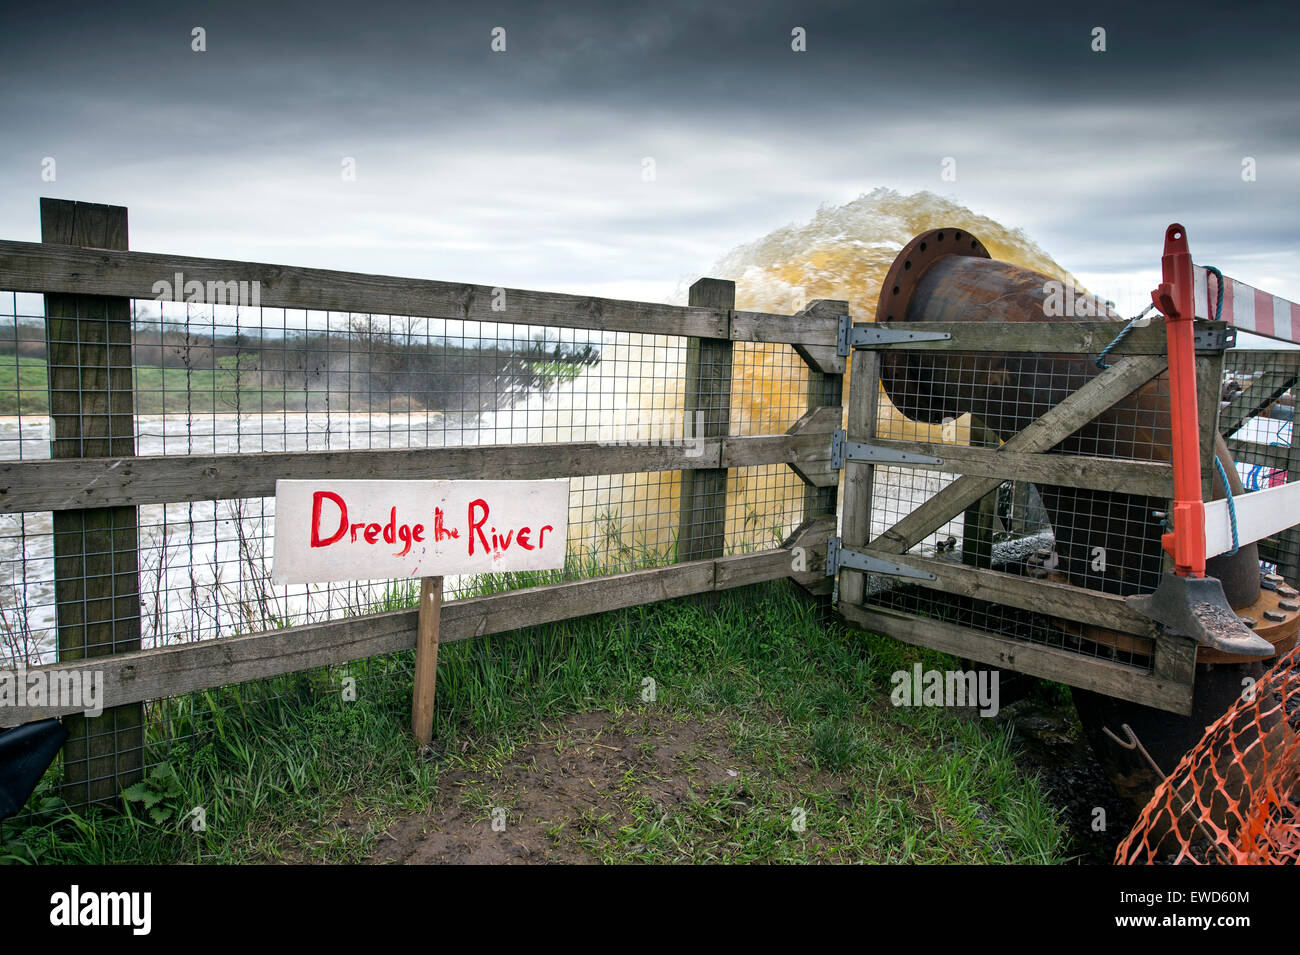 A 'Dredge the River' sign next to a pump outlet draining the flooded Somerset Levels into the River Parrett near Moorland Stock Photo